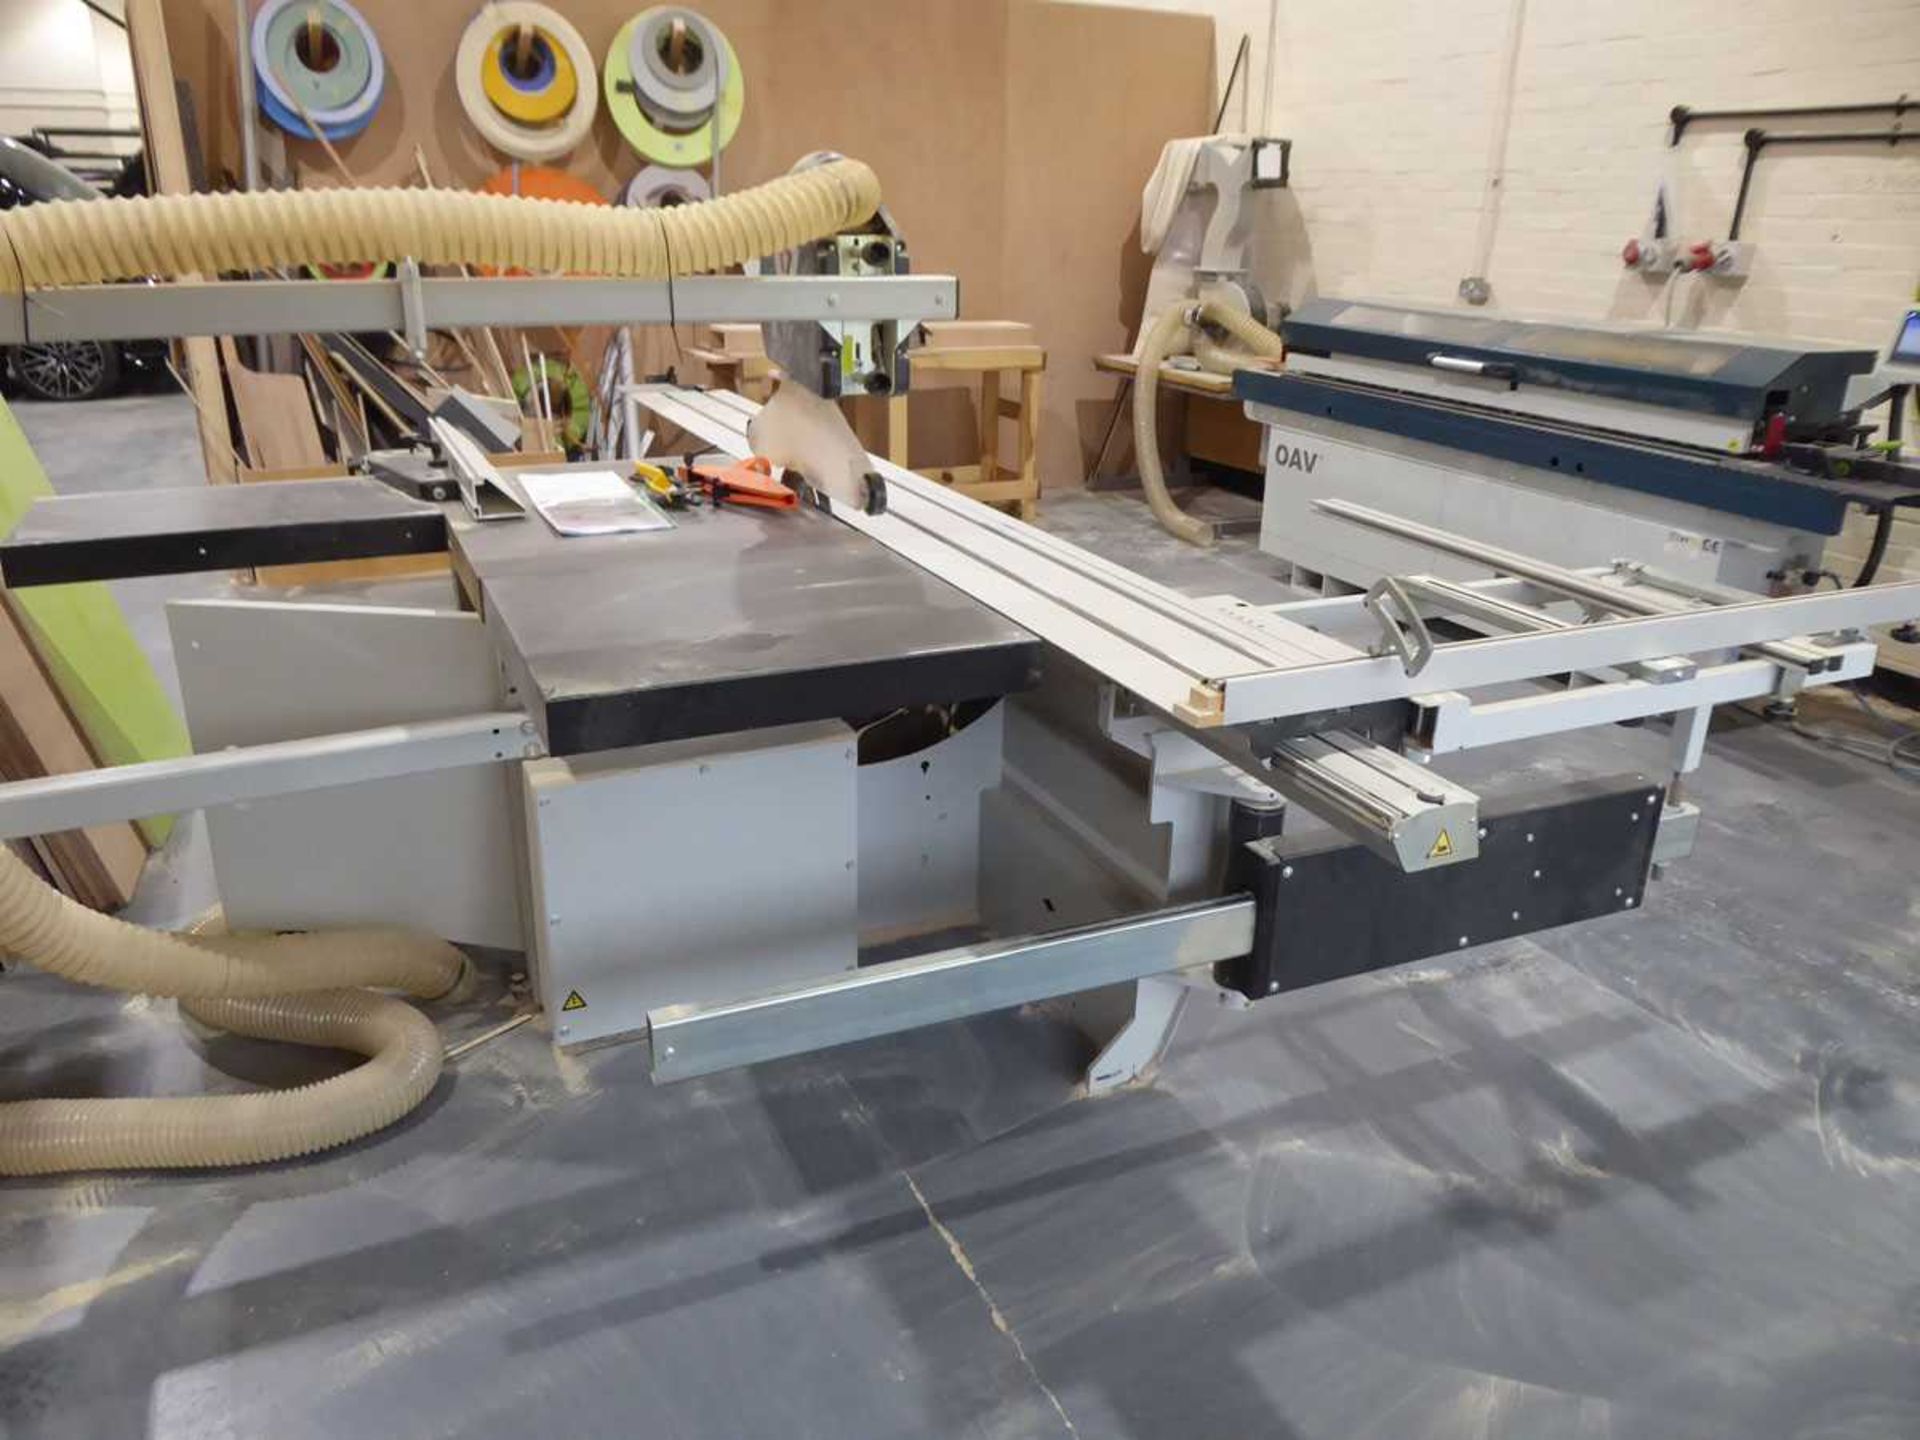 +VAT Robland FZ300 sliding table panel saw, serial no. 26KL22556, year 2020 - Image 6 of 7